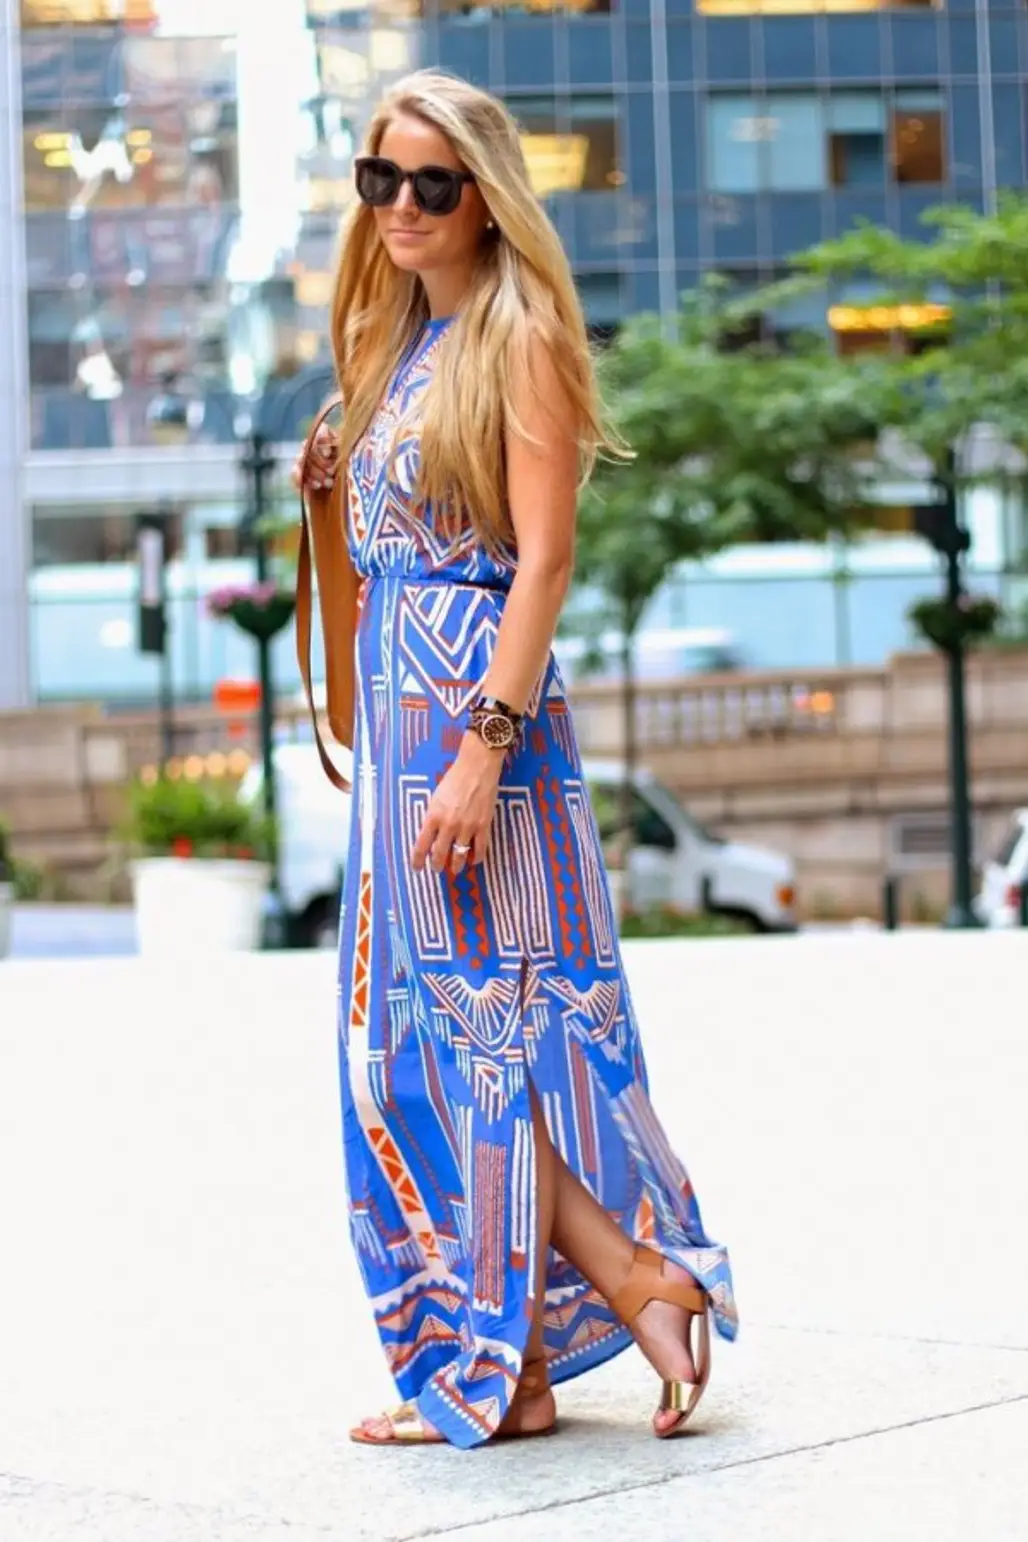 Perfect Dress and Sandals